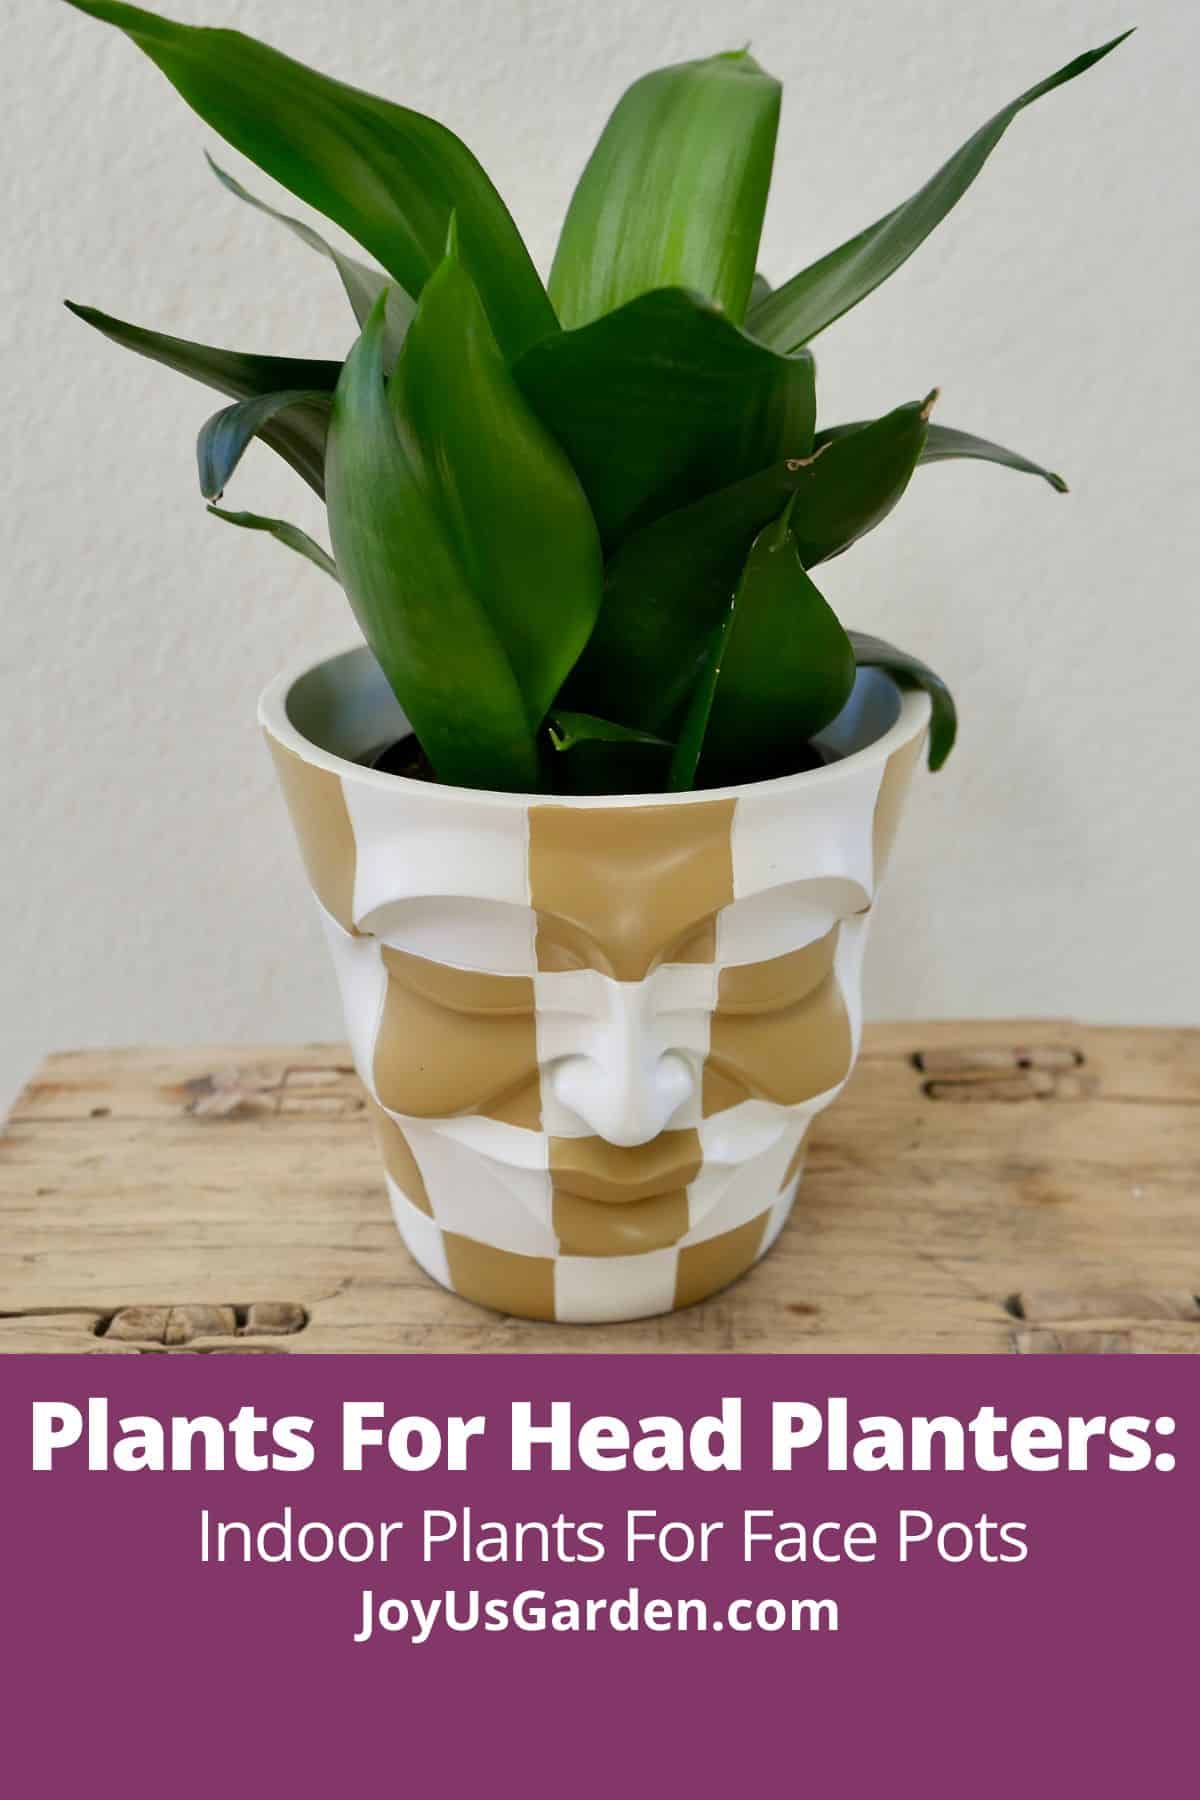 A small dark green snake plant in a checkered head planter text reads plants for head planters: indoor plants for face pots joyusgarden.com.